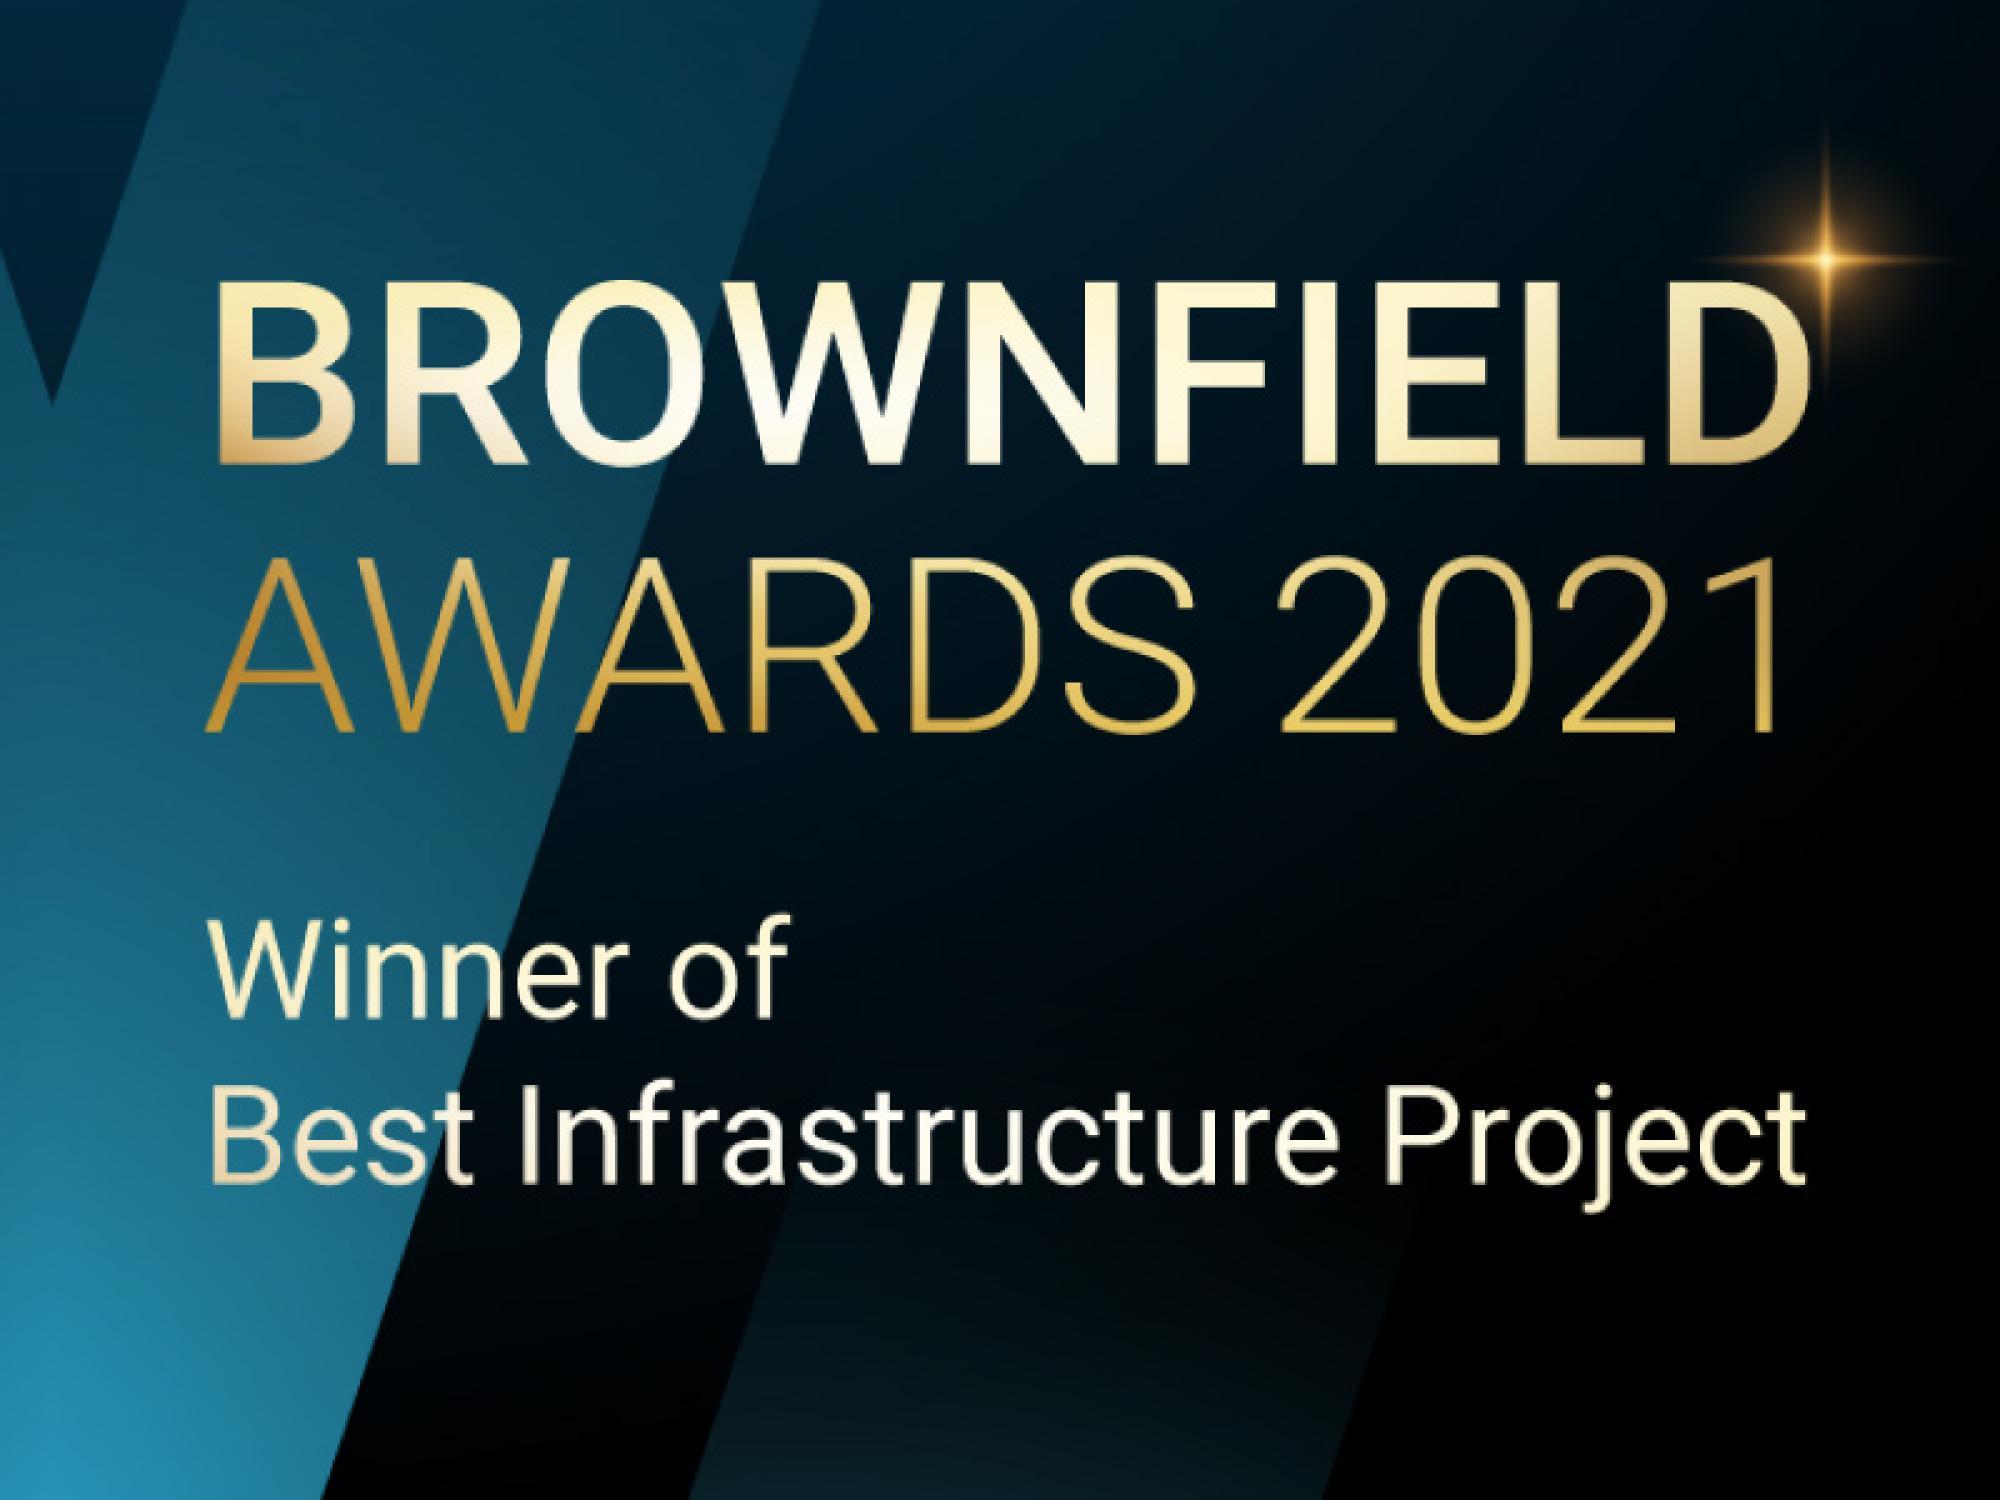 Best Infrastructure Project at Brownfield Awards 2021